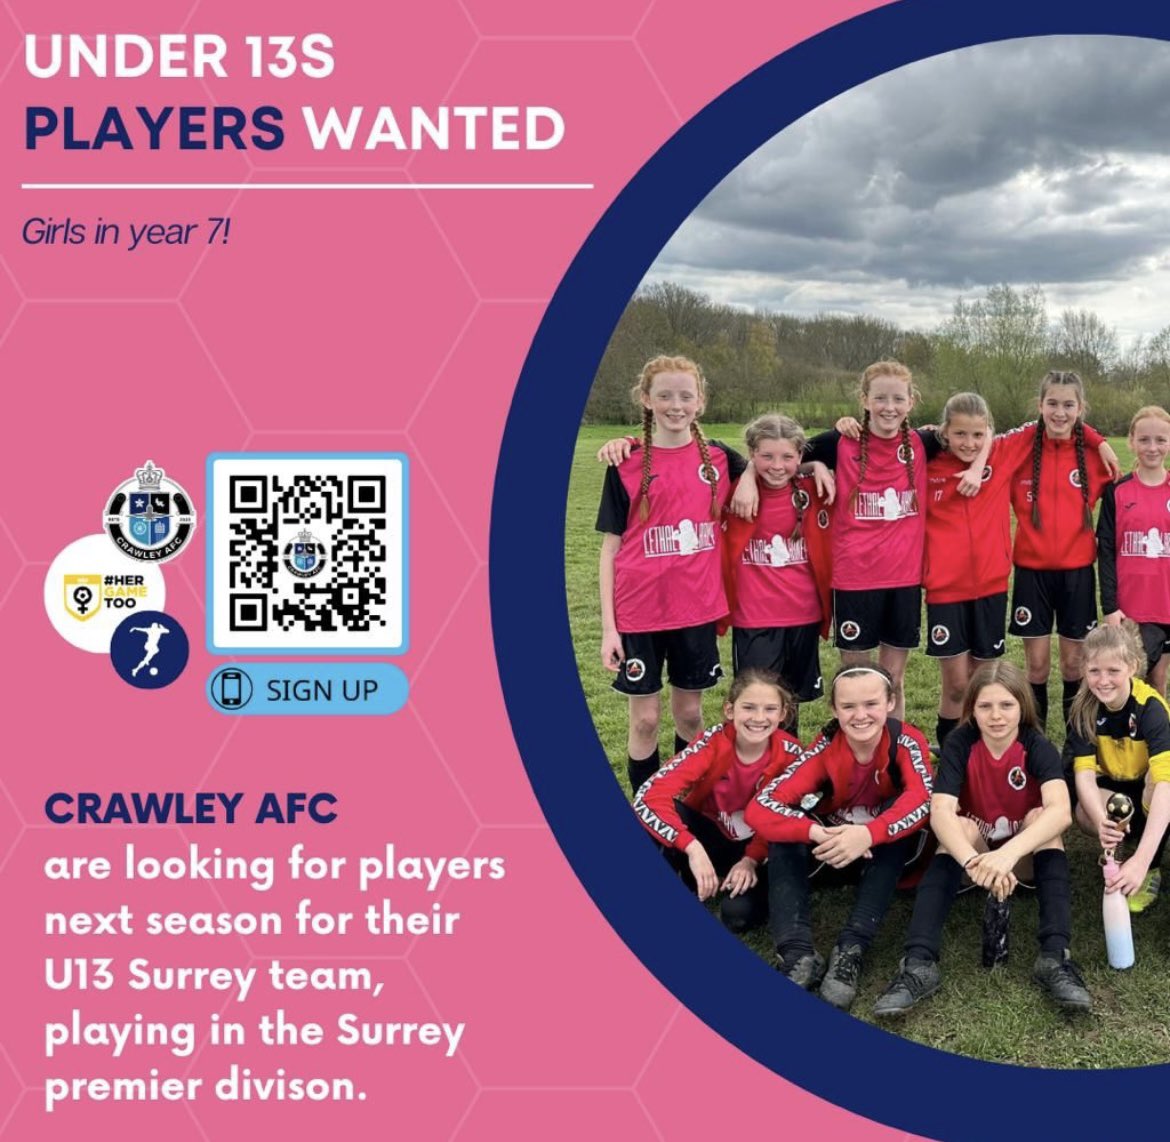 Crawley AFC U13s looking for new players! Scan bar code to sign up🔵🔵🔵 #WomensFootball #SussexFootball #SurreyFootball #grassrootsfootball